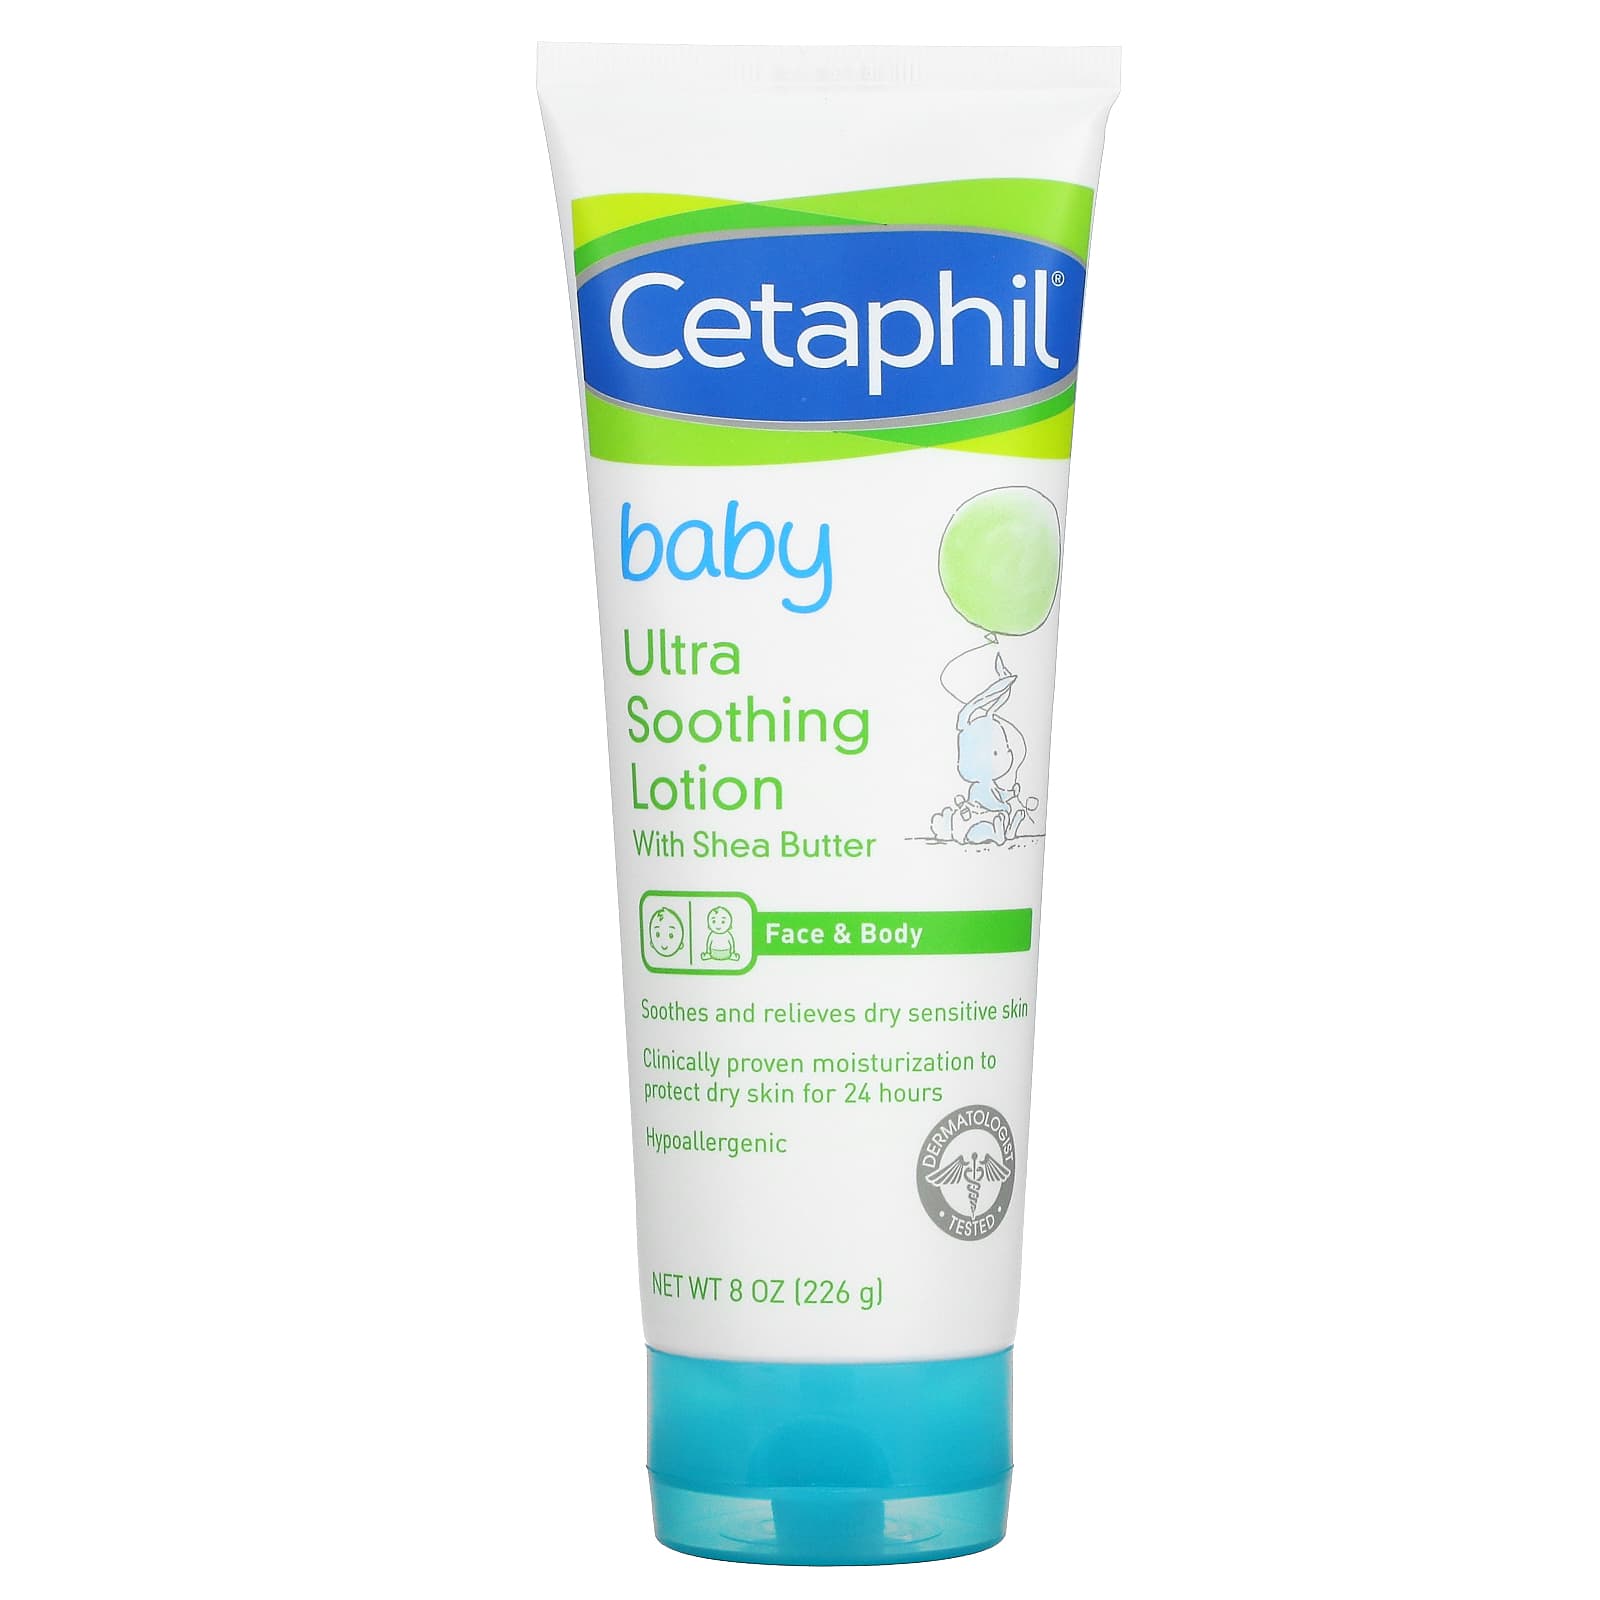 Cetaphil, Baby, Ultra Soothing Lotion with Shea Butter(226 g)